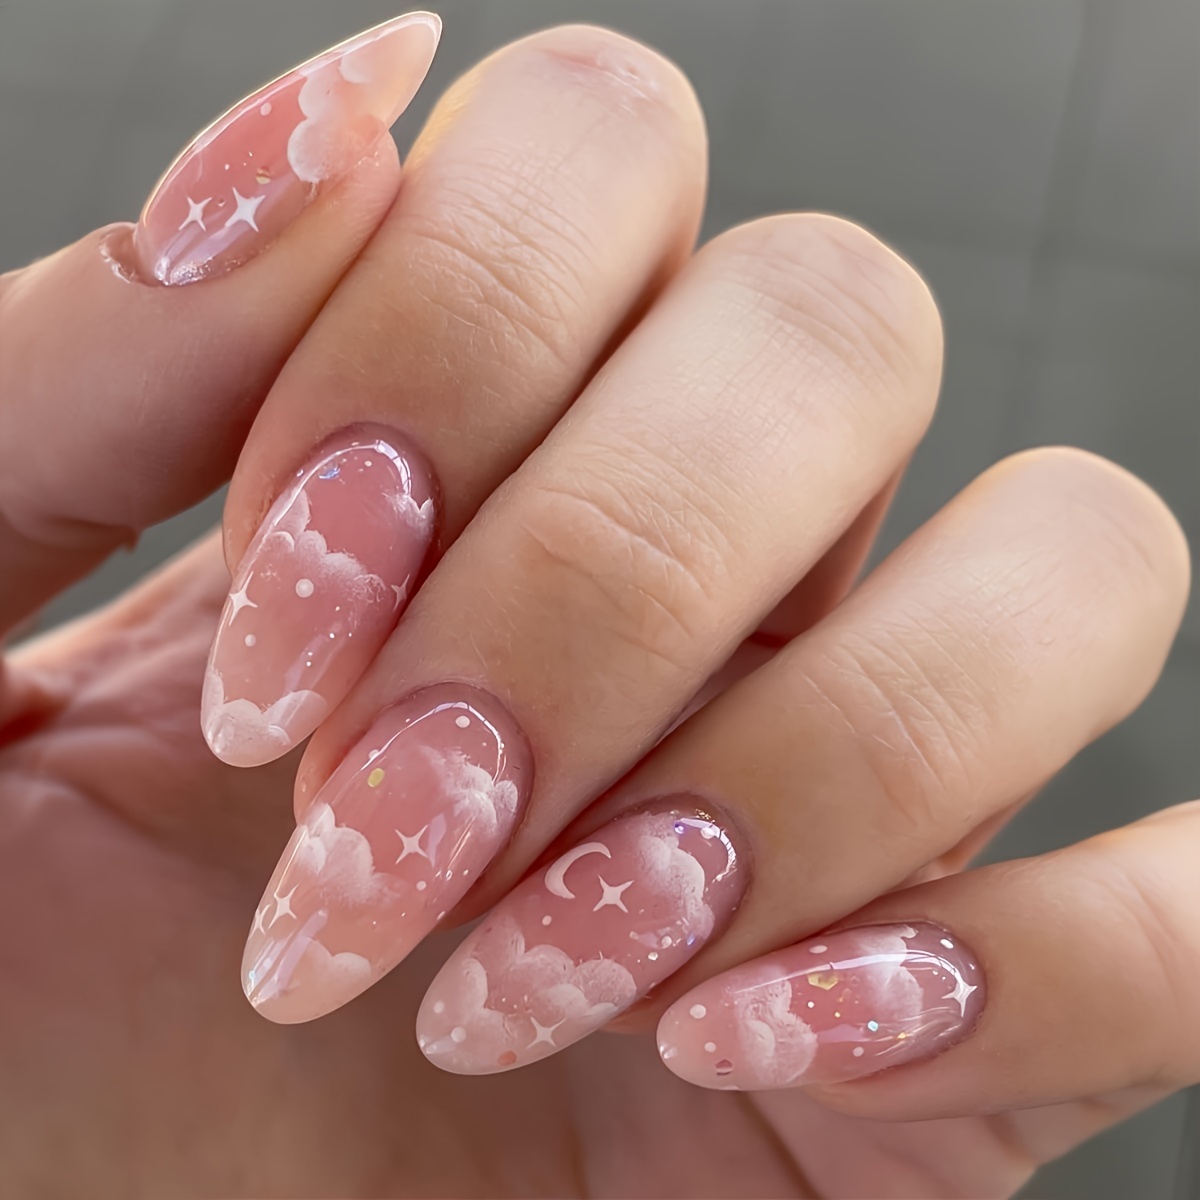 

24 Pcs Almond Press On Nails Medium Fake Nails White Clouds Design Acrylic False Nails Press On Nails With Stars Moon Design Full Cover Glue On Nails Stick On Nails For Women Girls Manicure Art